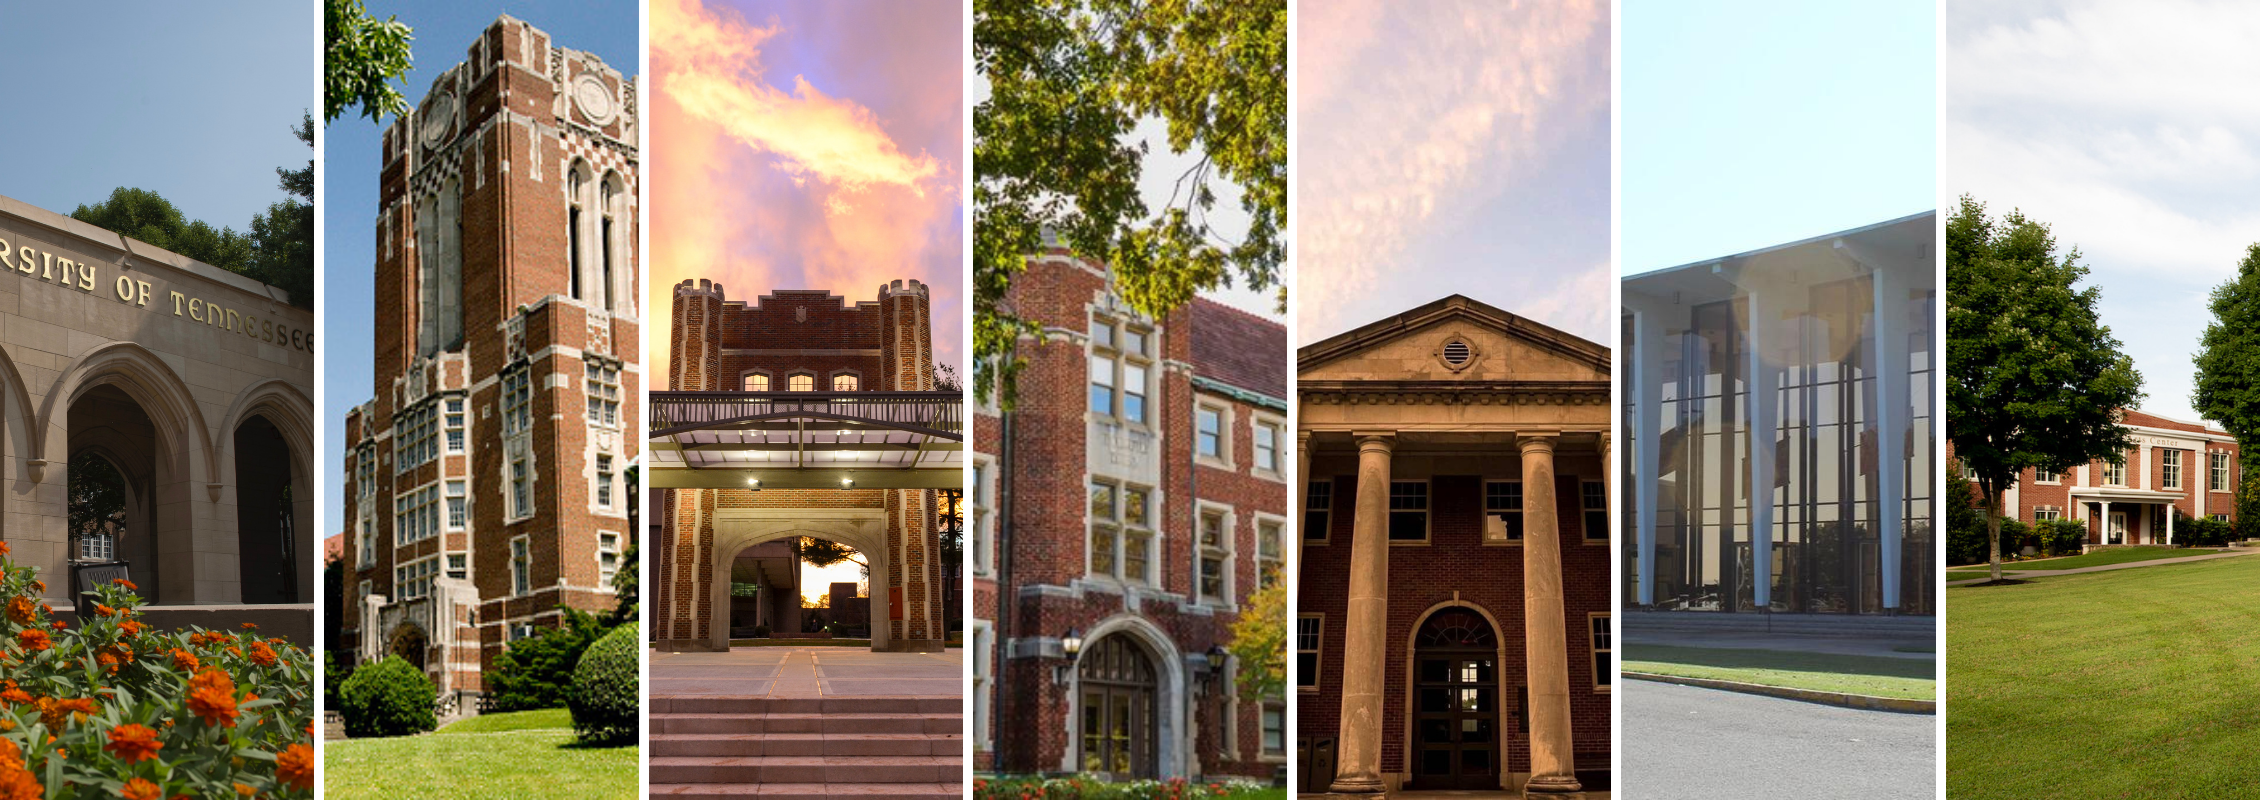 University of Tennessee Building Collage